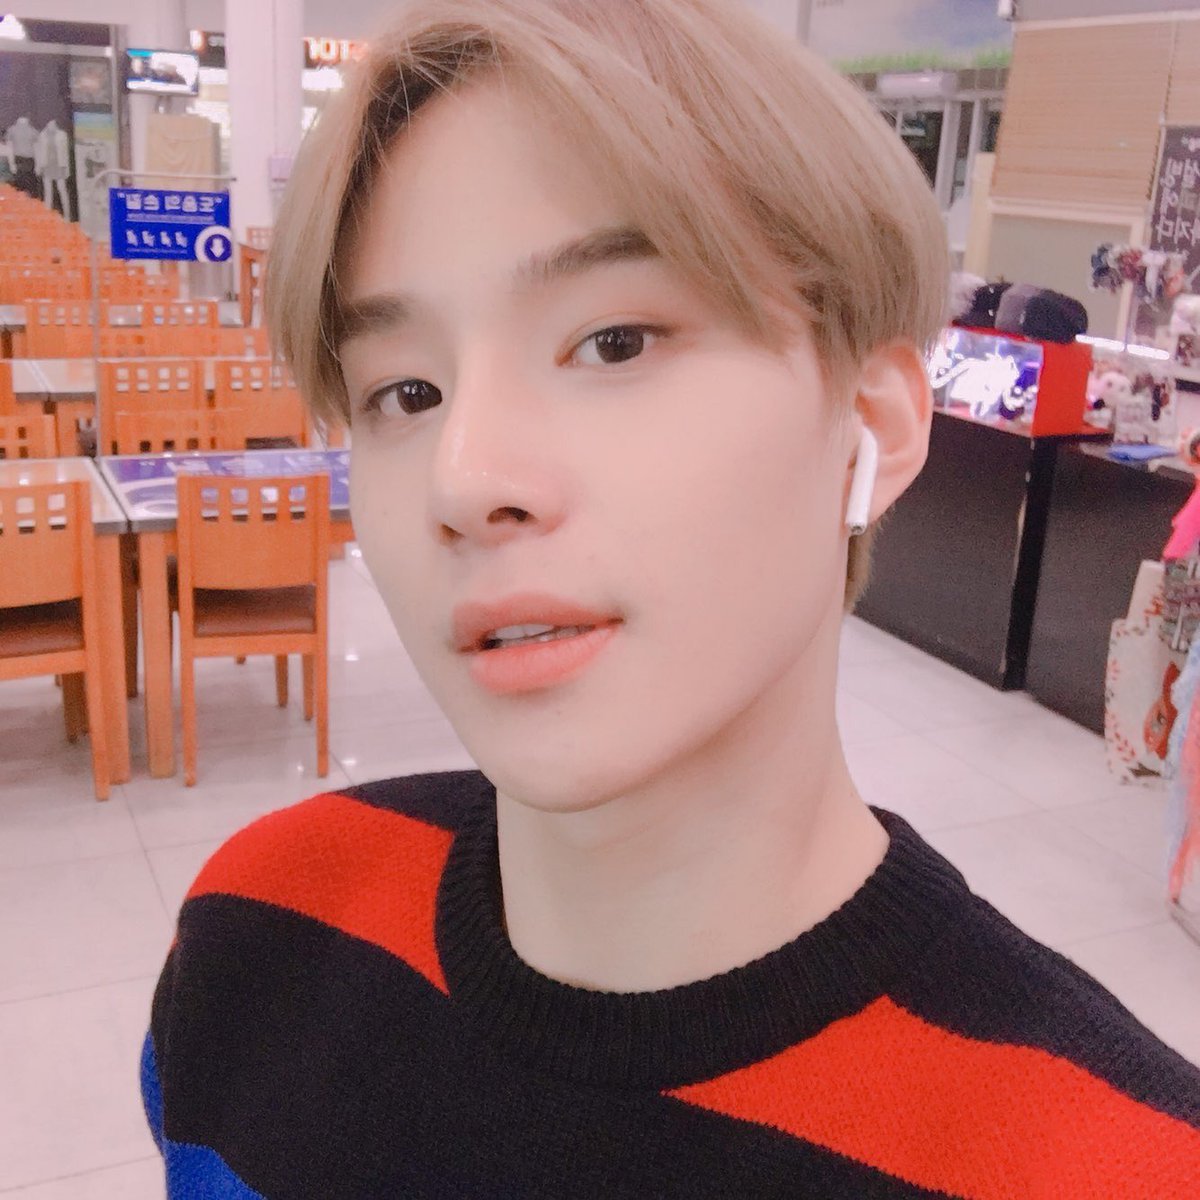 jungwoo as granadír-people have different opinions on it-the truth is it is a unique combination of ingredients that shouldn't work together but do-not everyone is able to comprehend the greatness and advanced taste of this meal-if galaxy brain was food it would be granadír